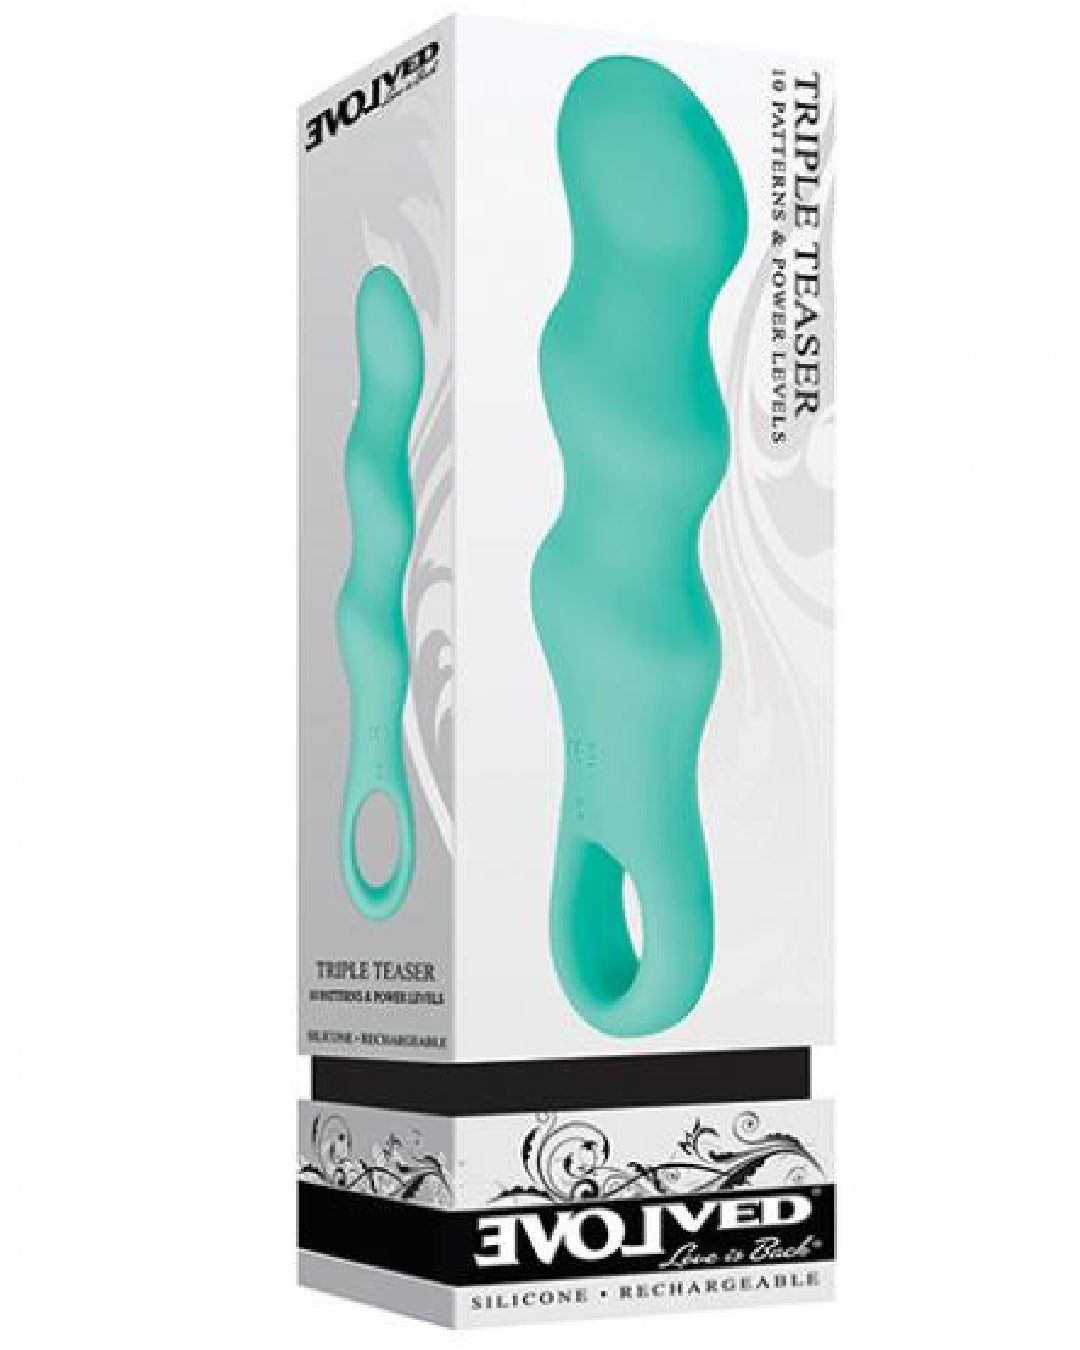 Mint Triple Teaser Powerful 3 Motor Silicone Vibrator product box 